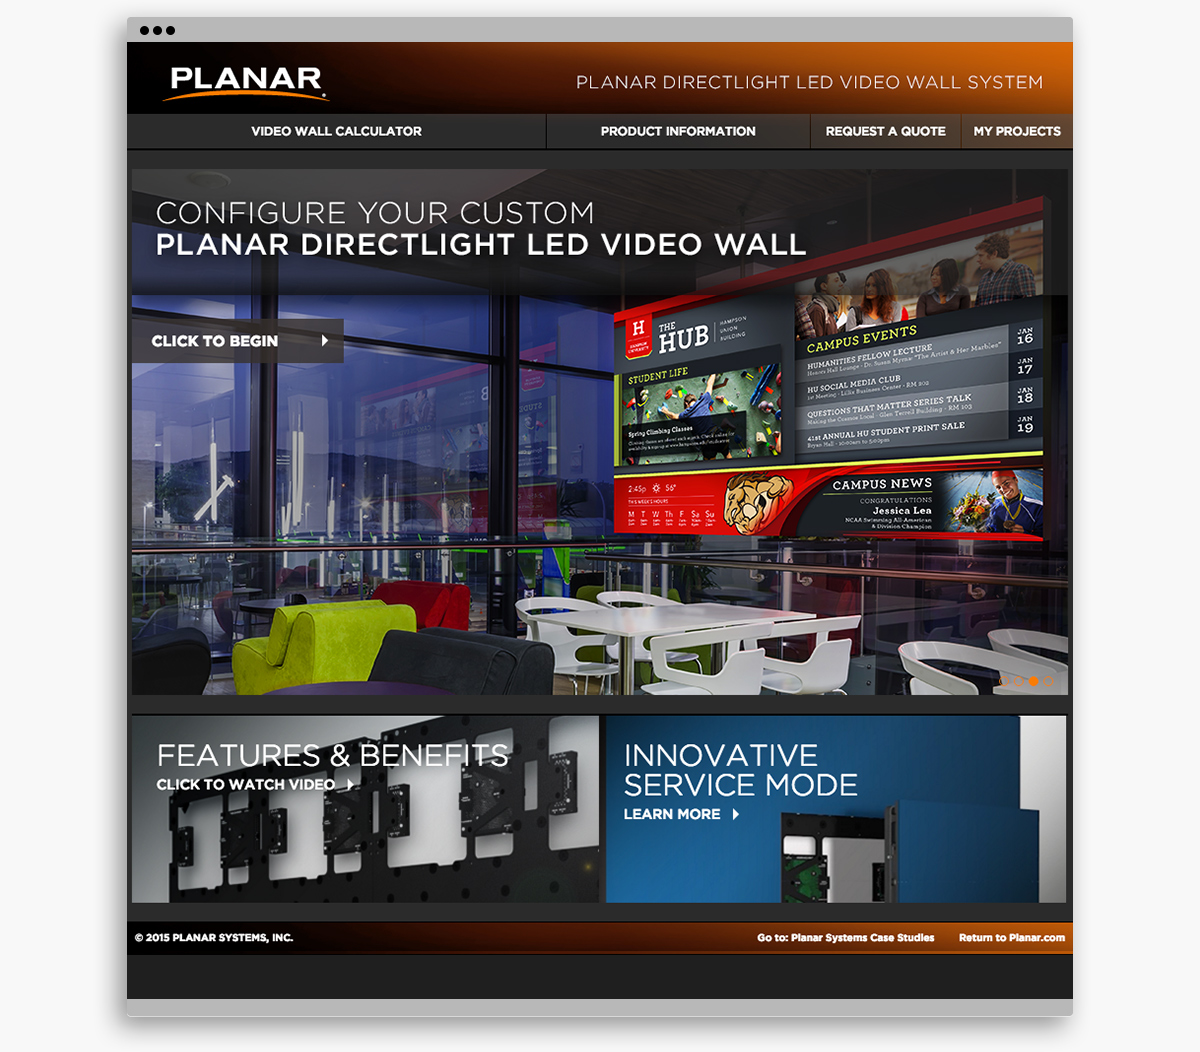 Planar Directlight LED Video Wall System homepage